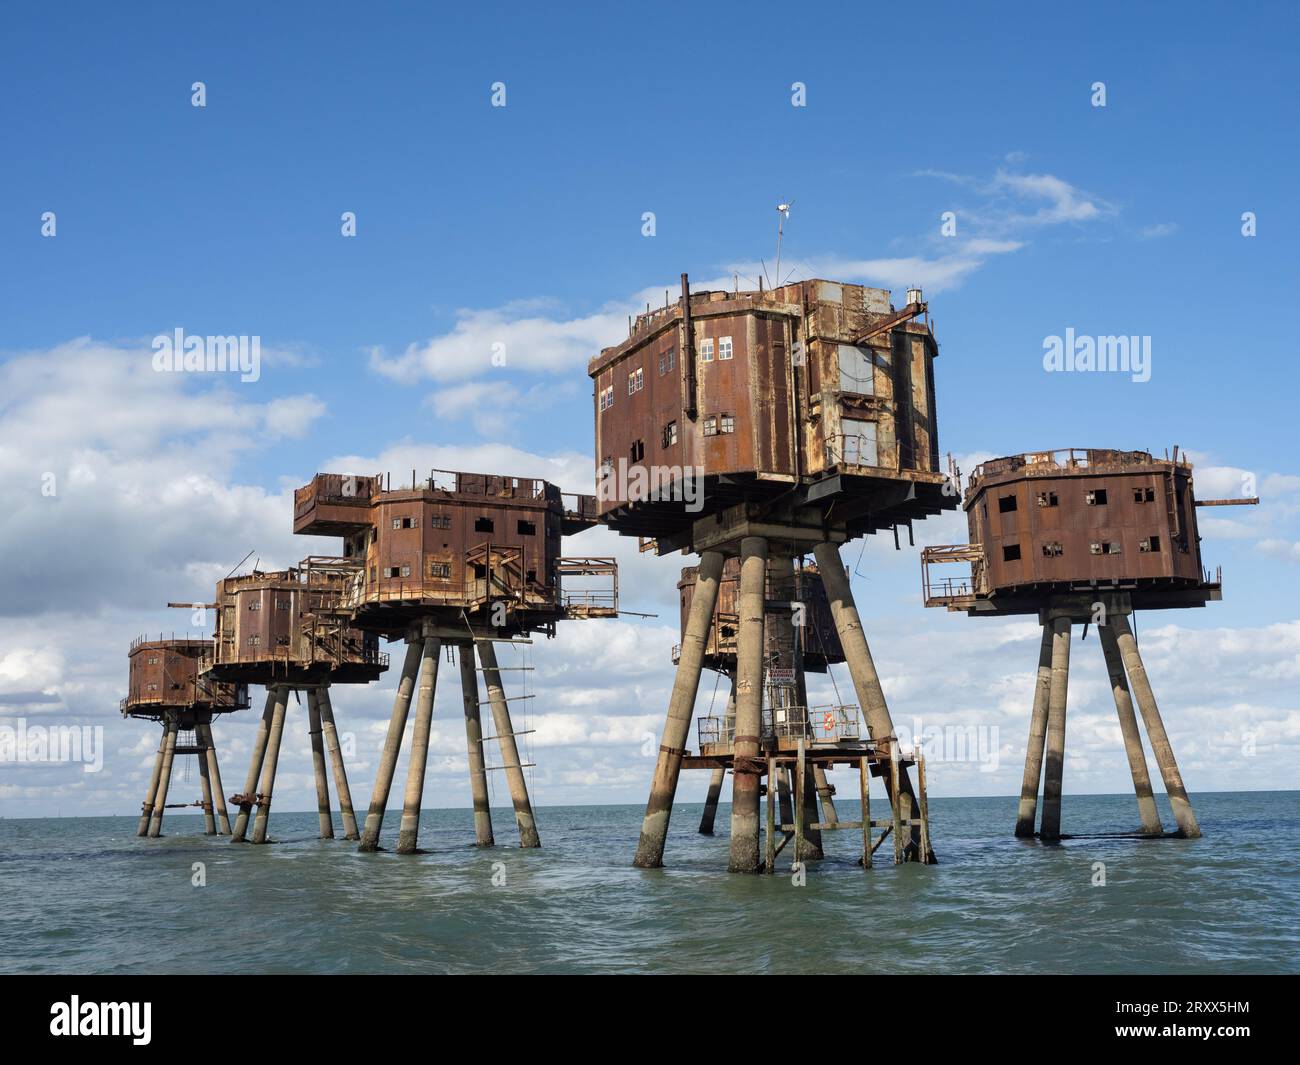 Maunsell Sea Forts in the Thames estuary Stock Photo